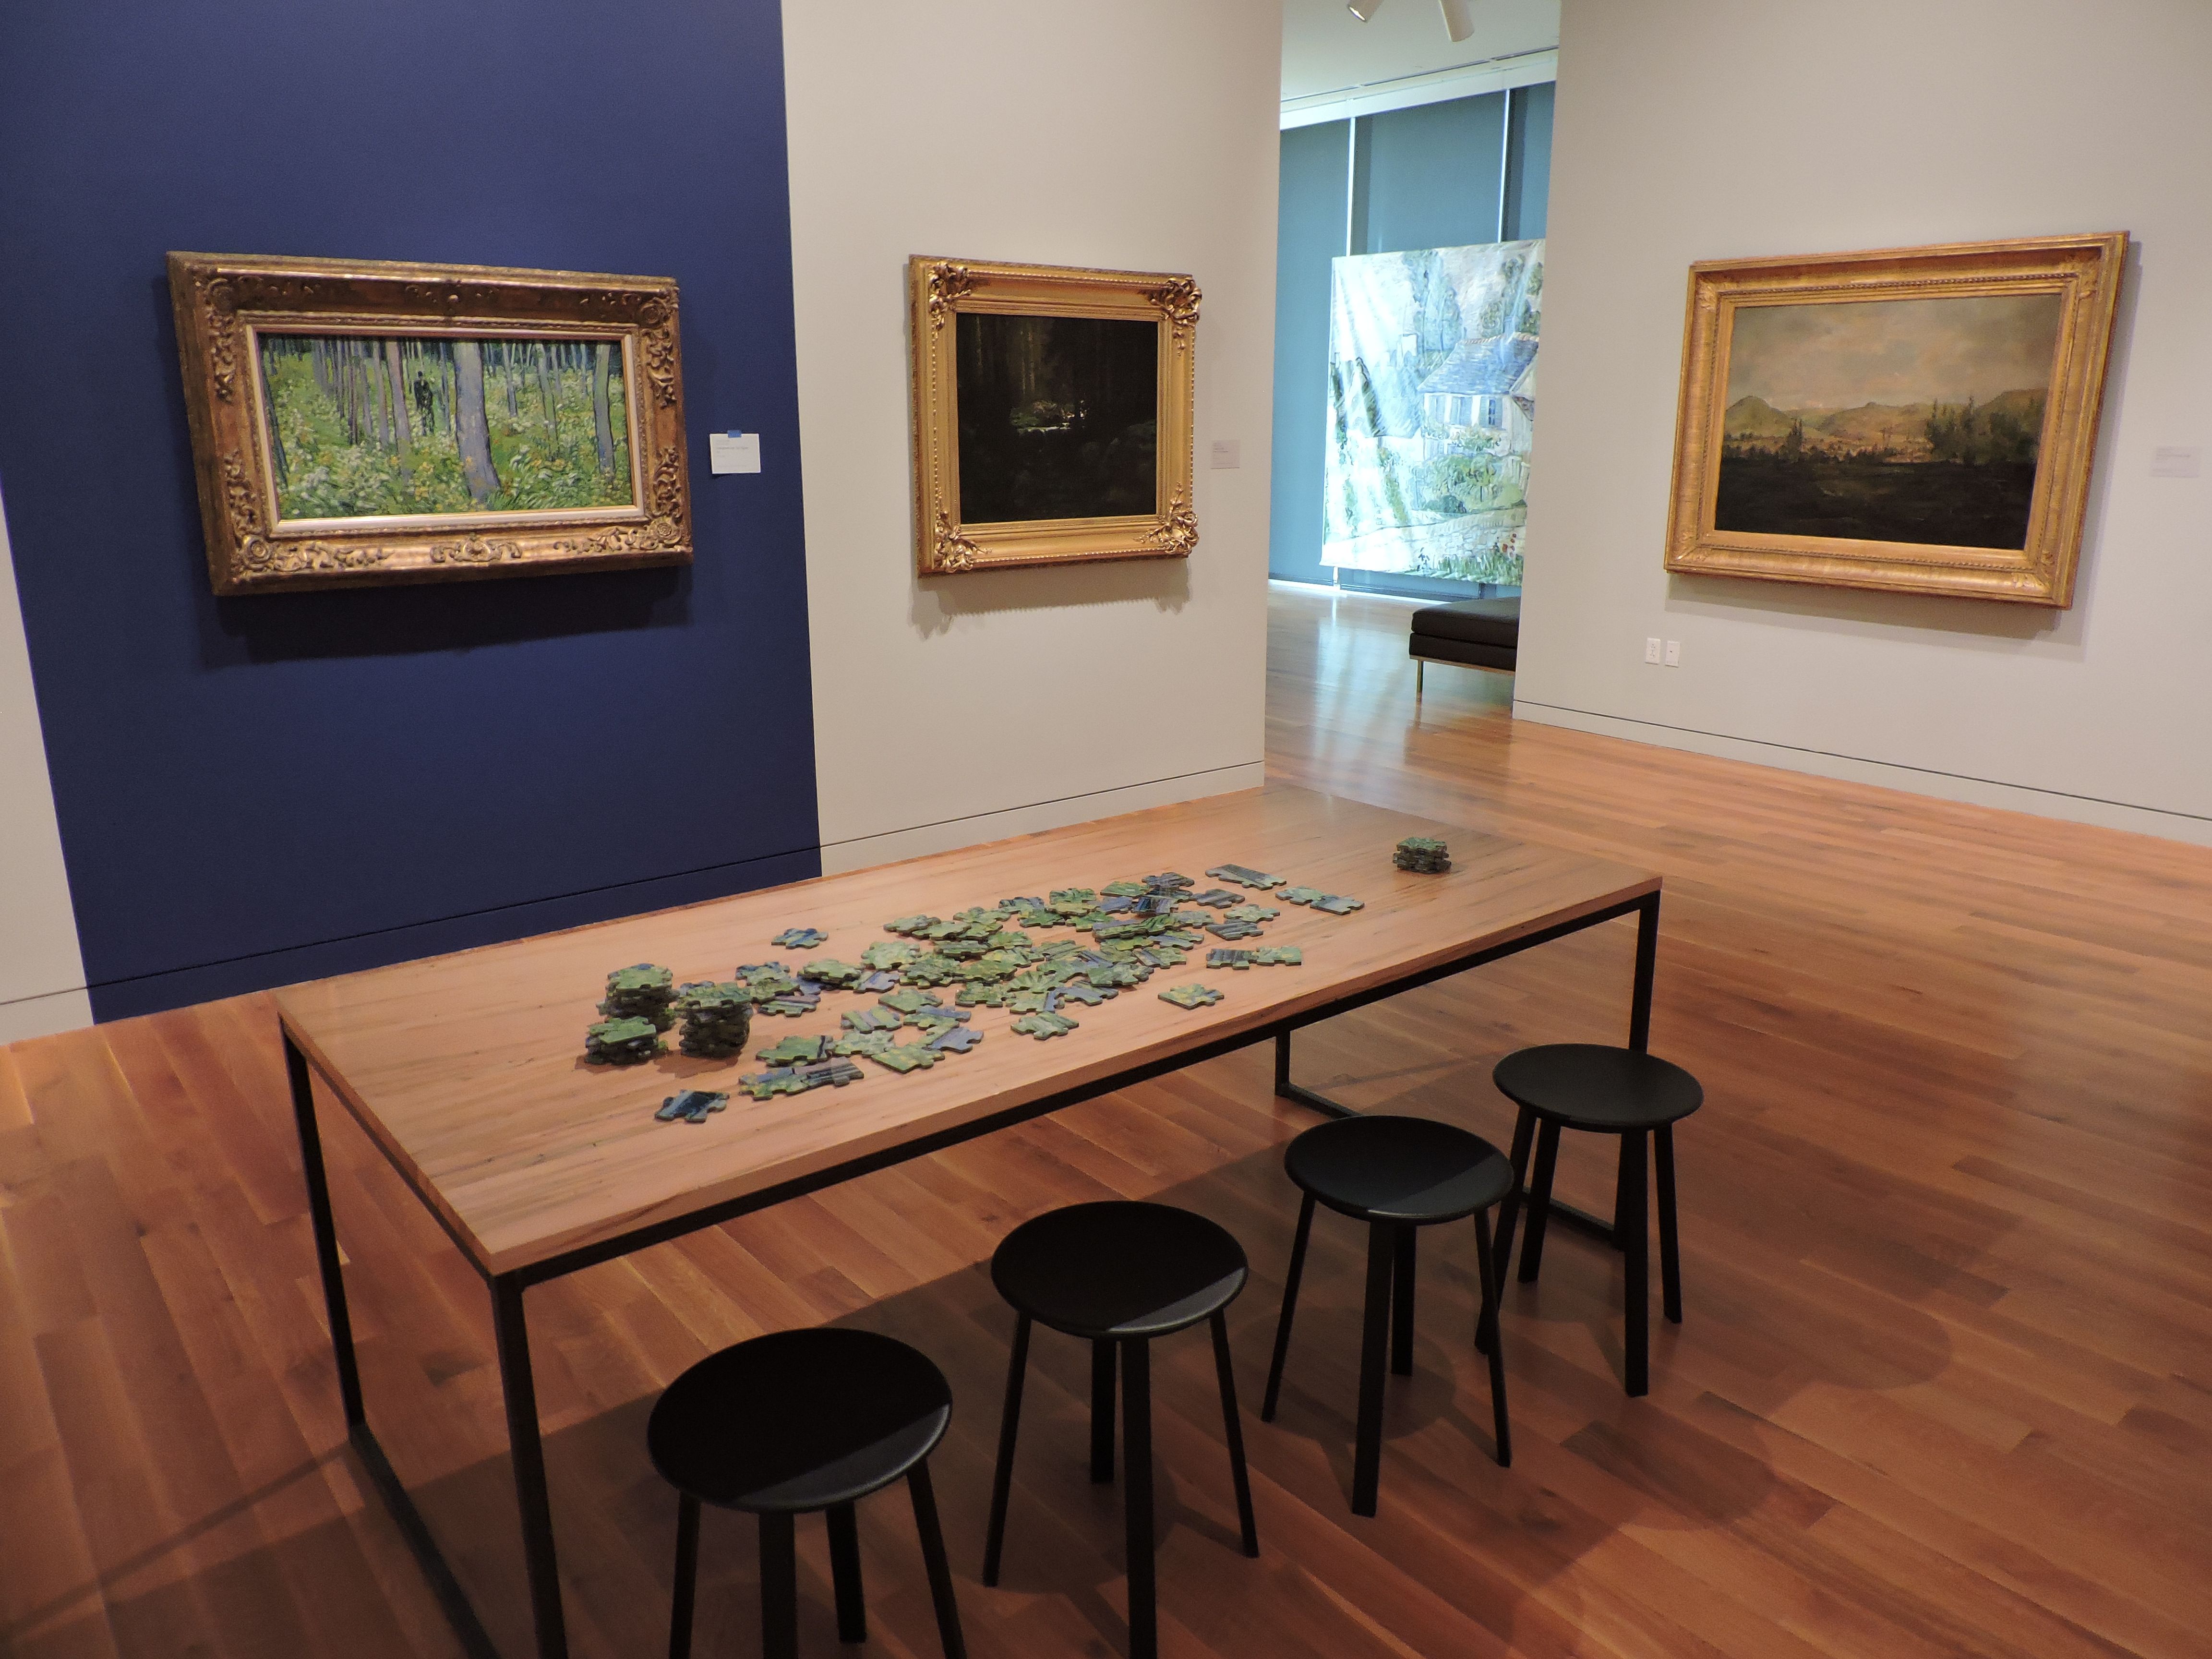 A table with a large puzzle and stools sits in the middle of an art museum exhibit, with paintings on the walls